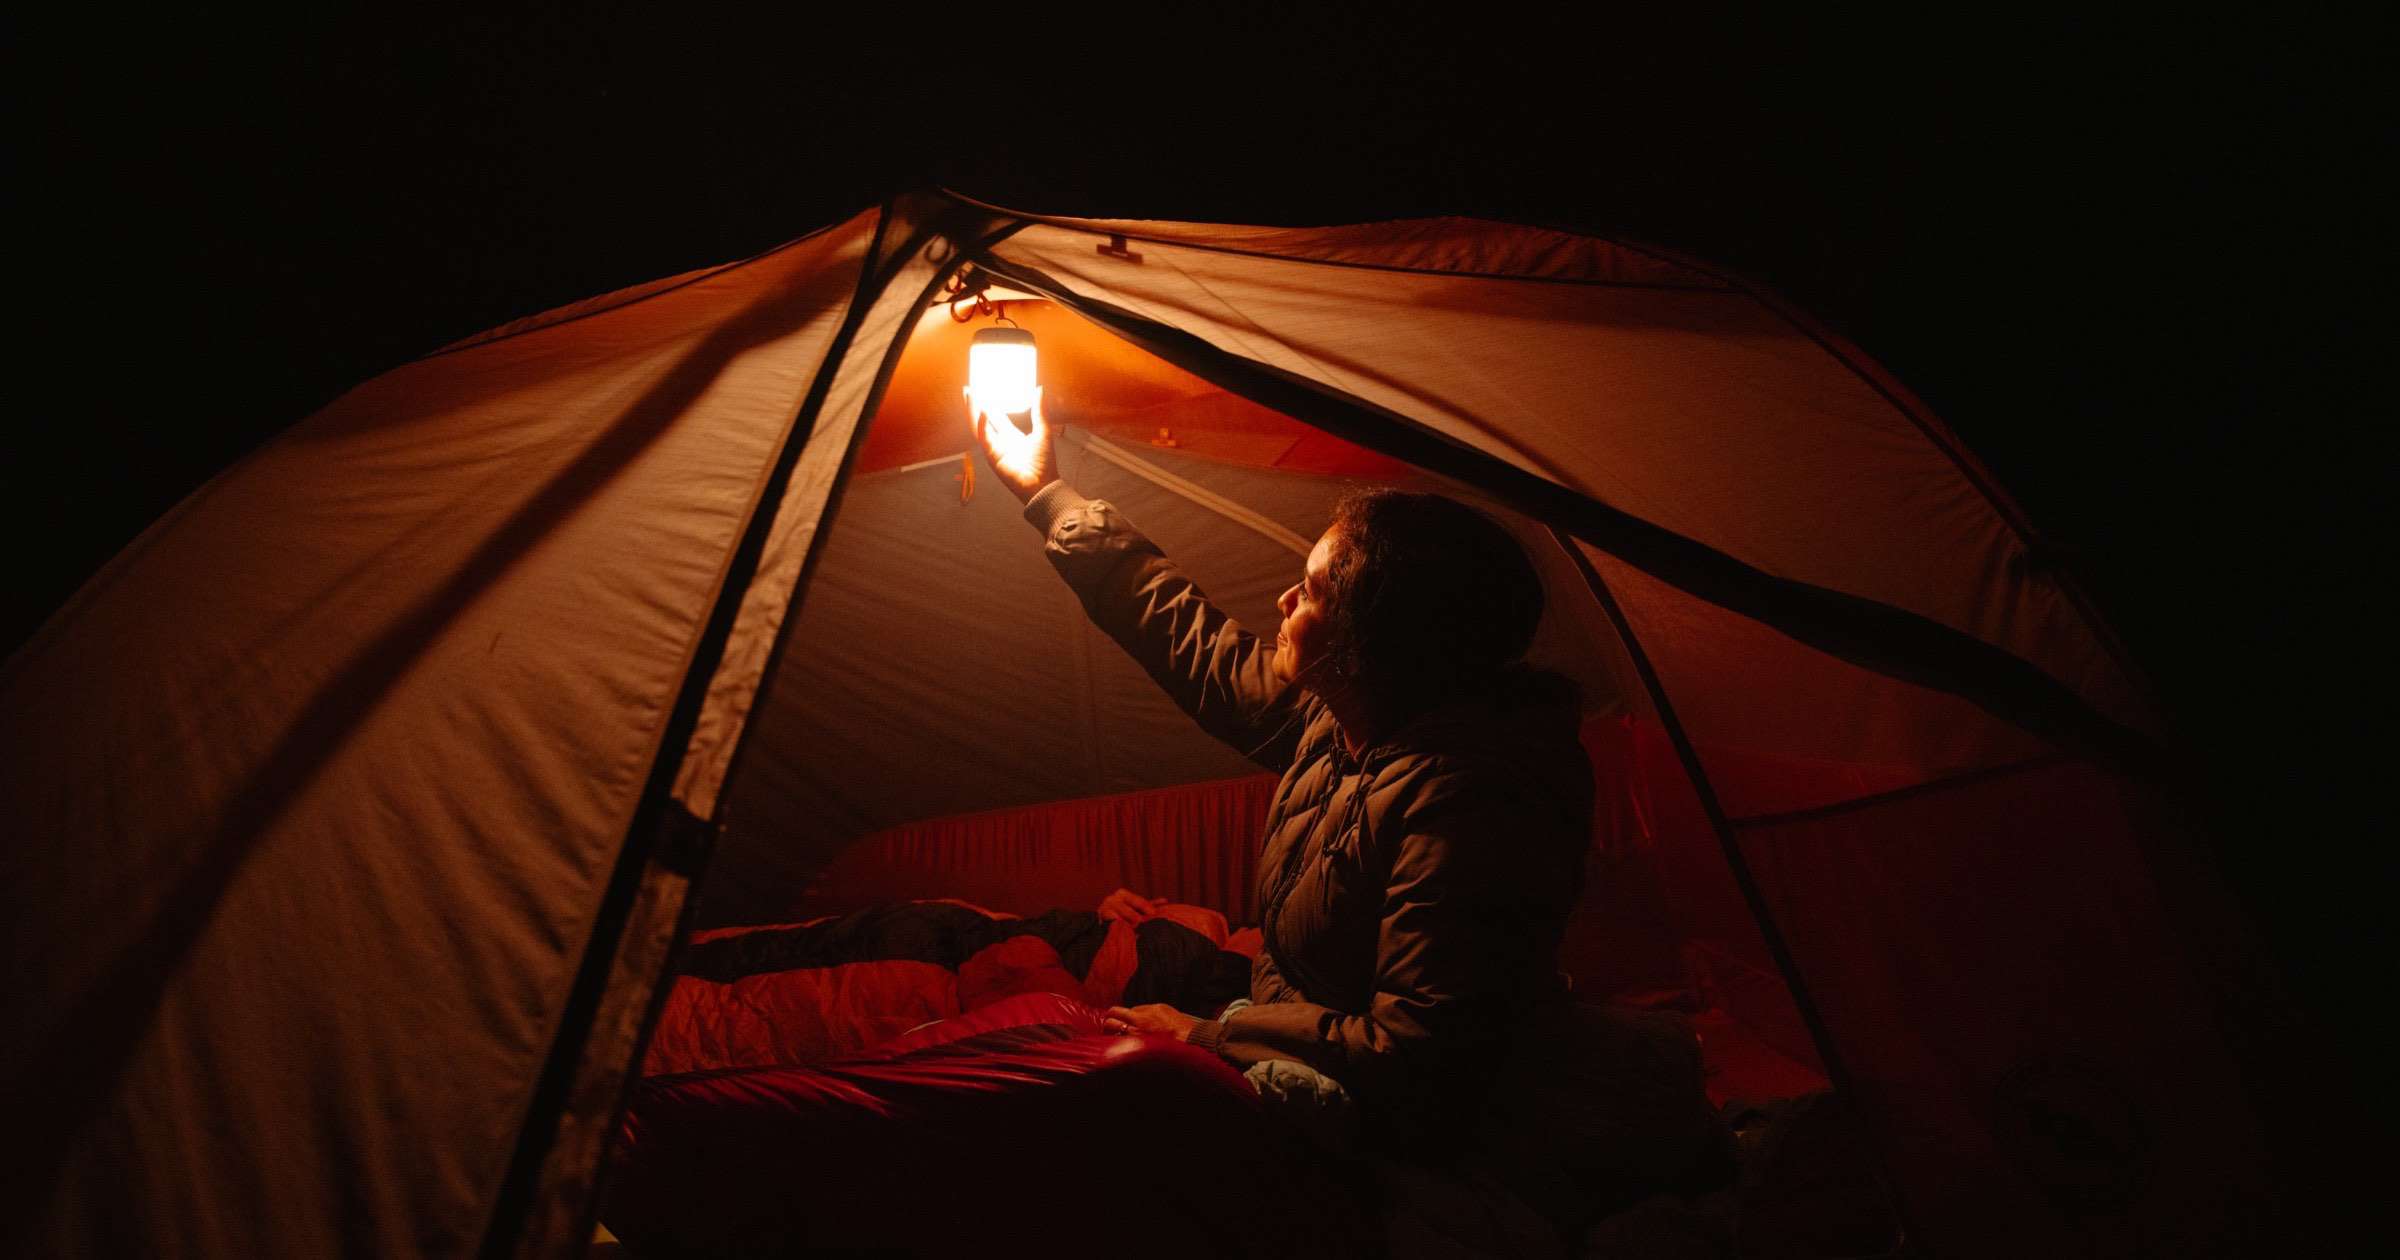 BioLite’s AlpenGlow Lamps are Perfect for the Outdoors